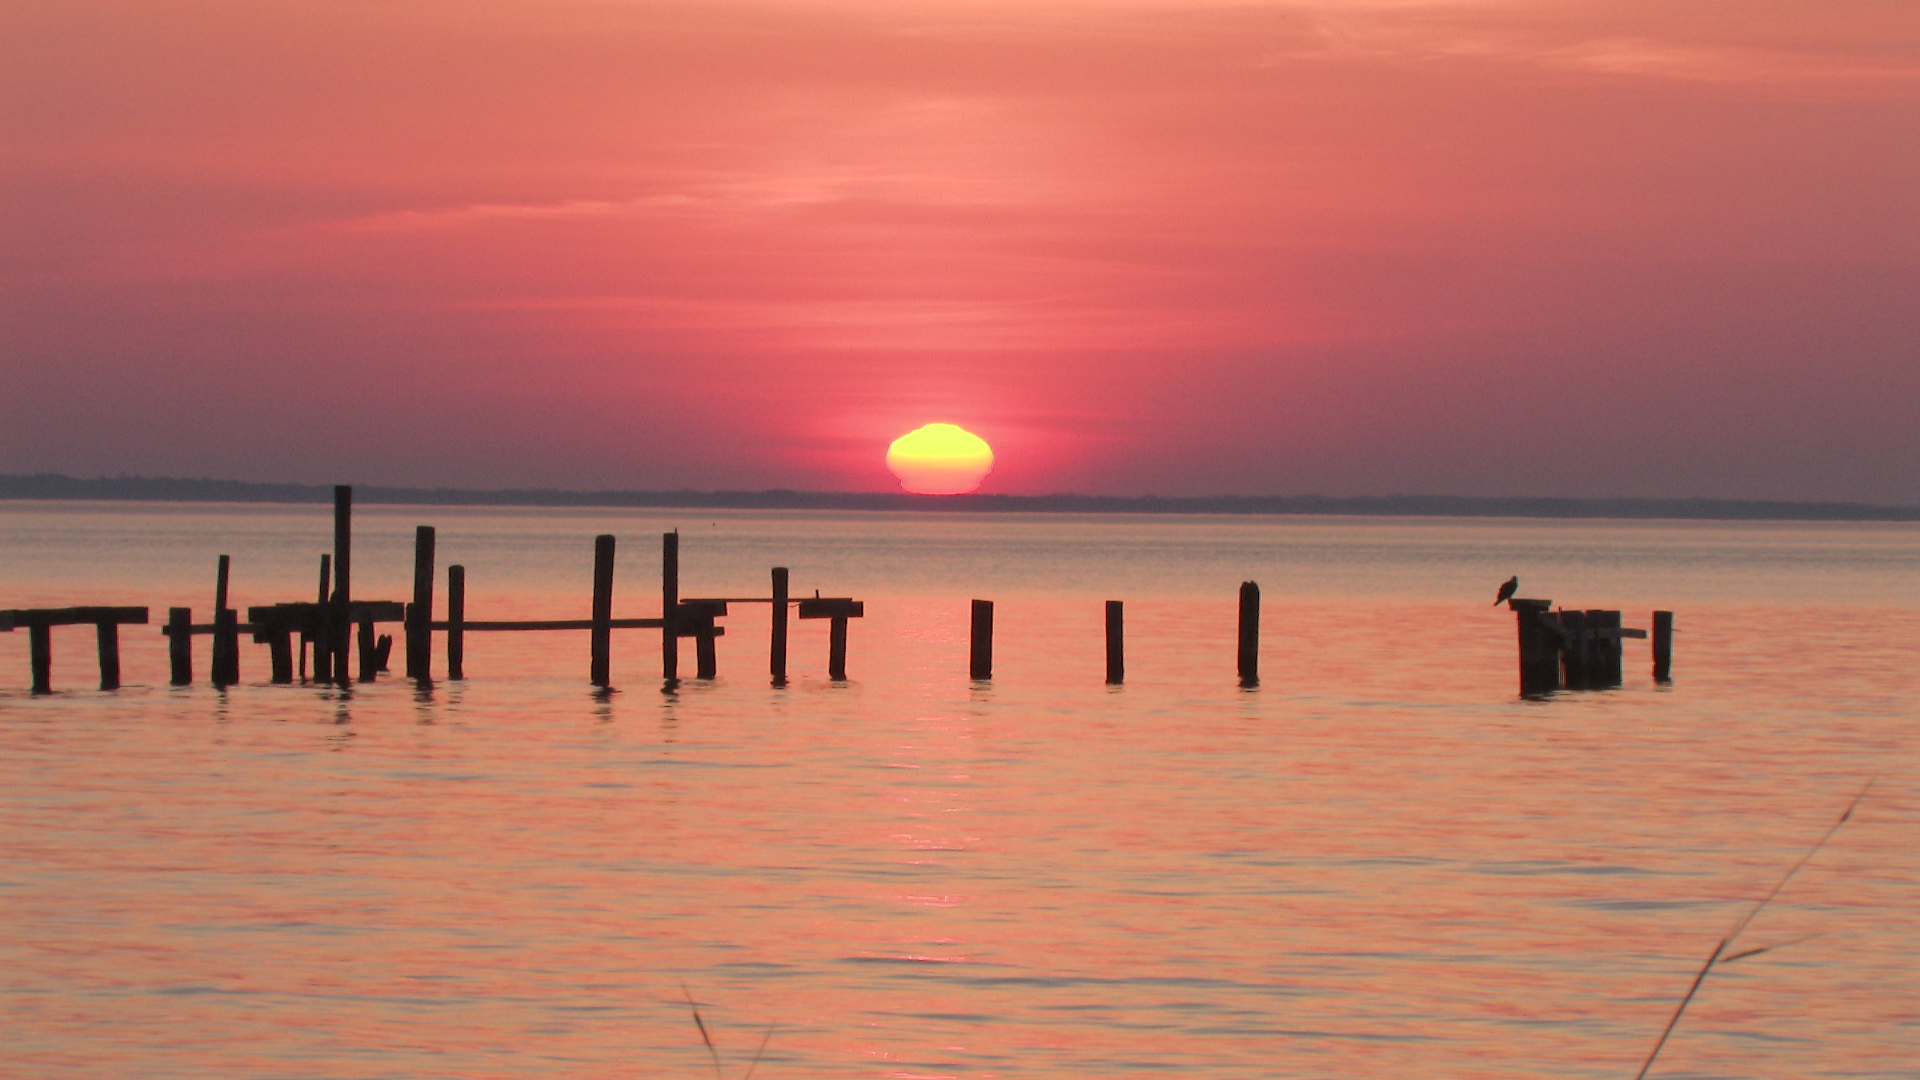  sunrise over one of Marylands tributaries of the Chesapeake Bay